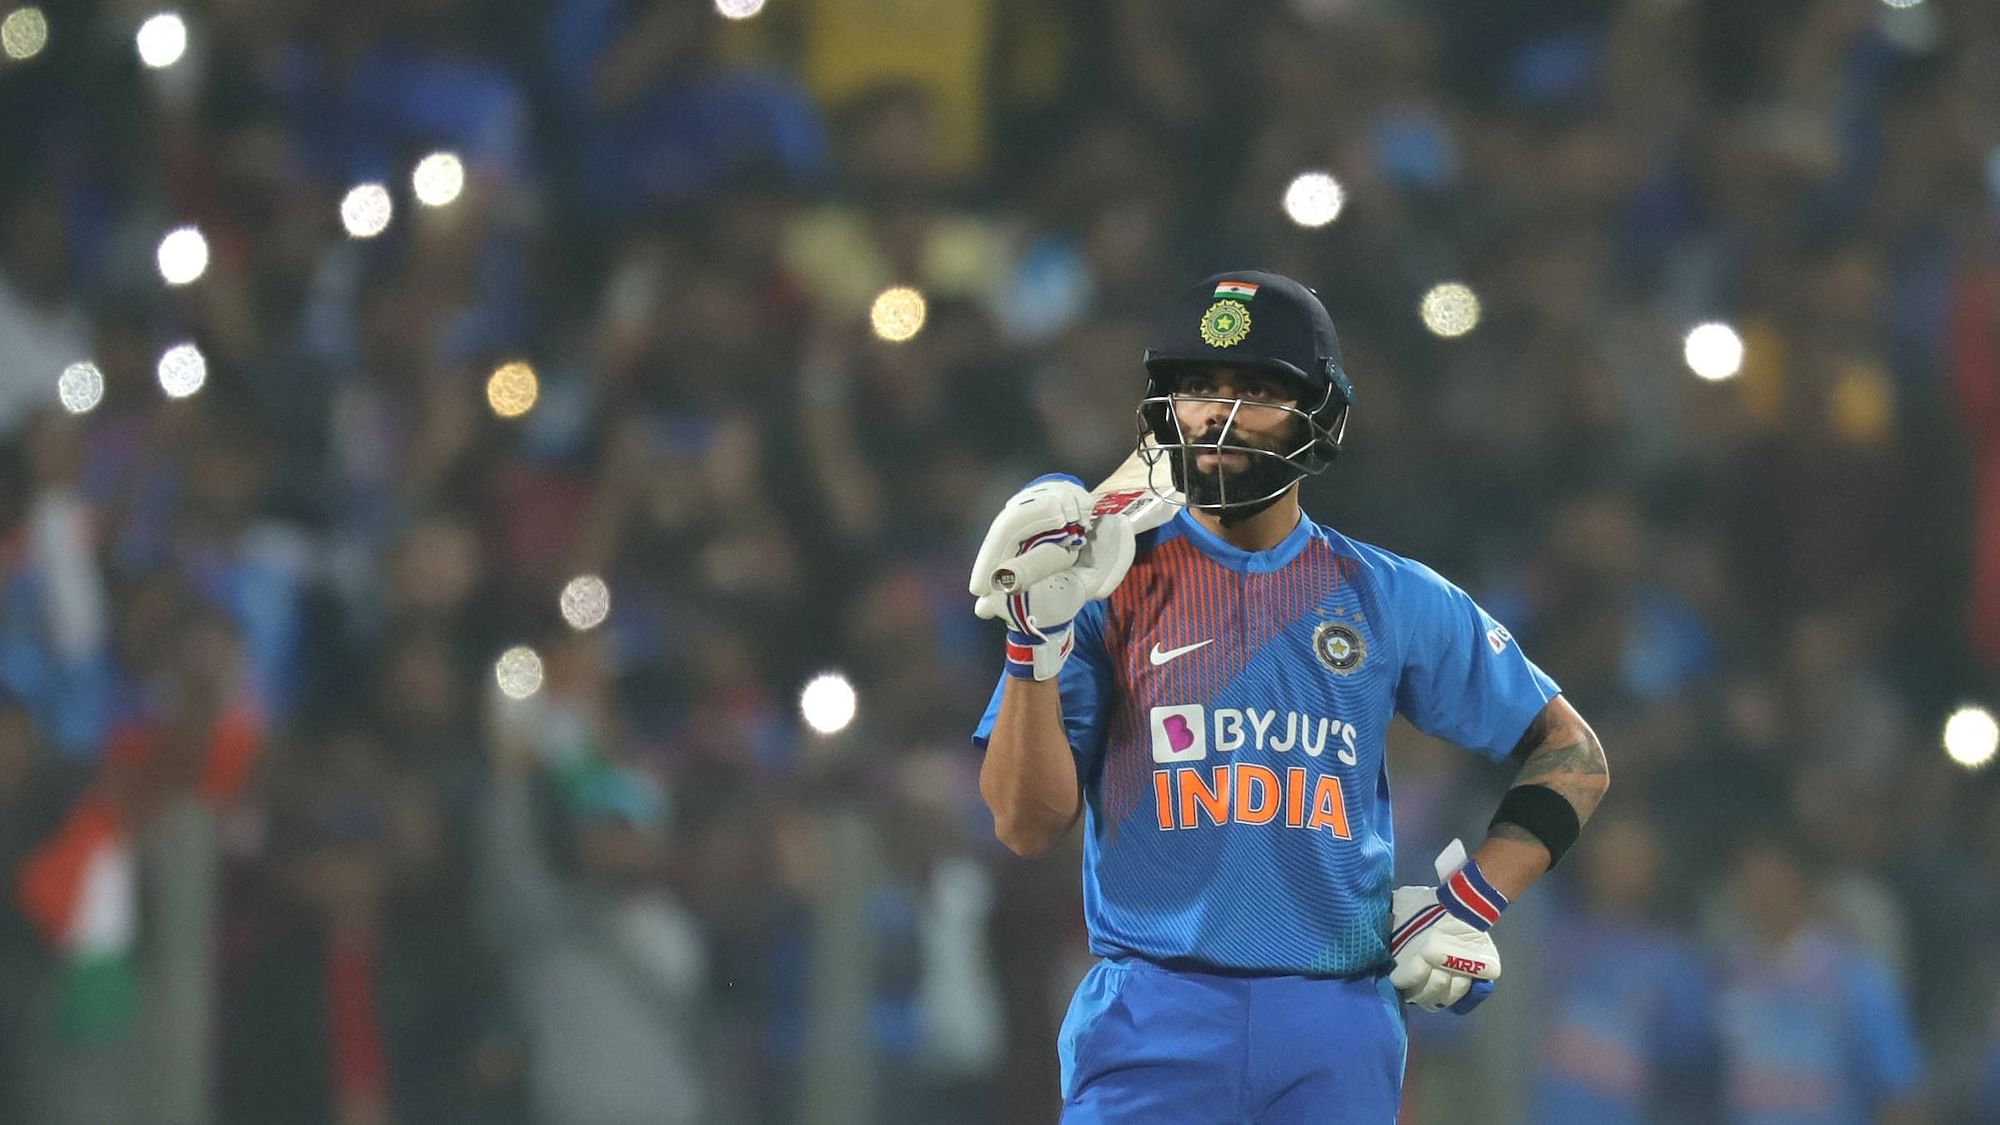 Virat Kohli scored 26 off 17 deliveries before he was run-out.